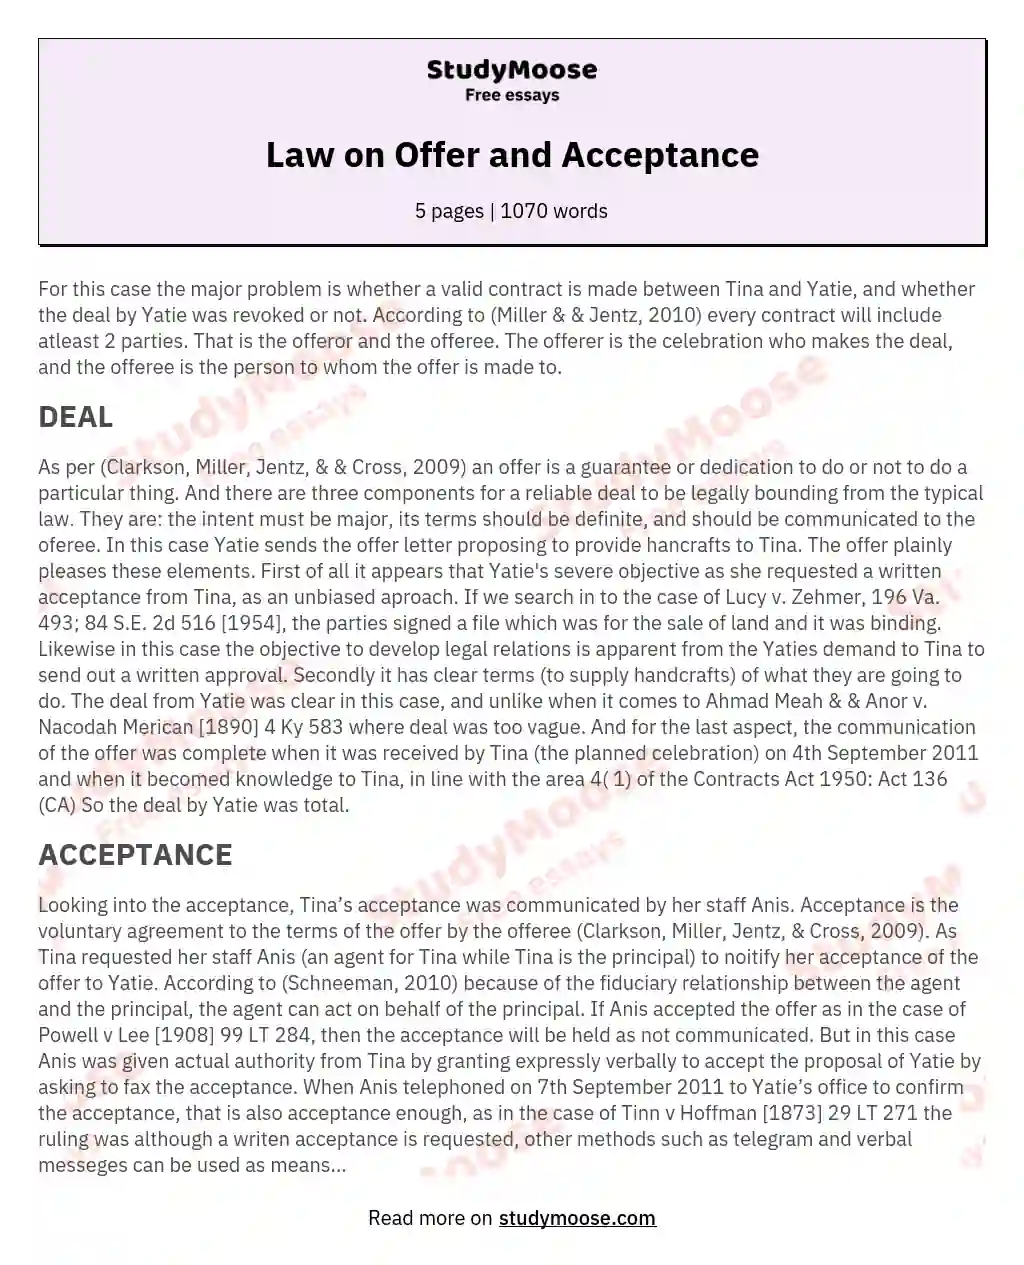 Law on Offer and Acceptance essay